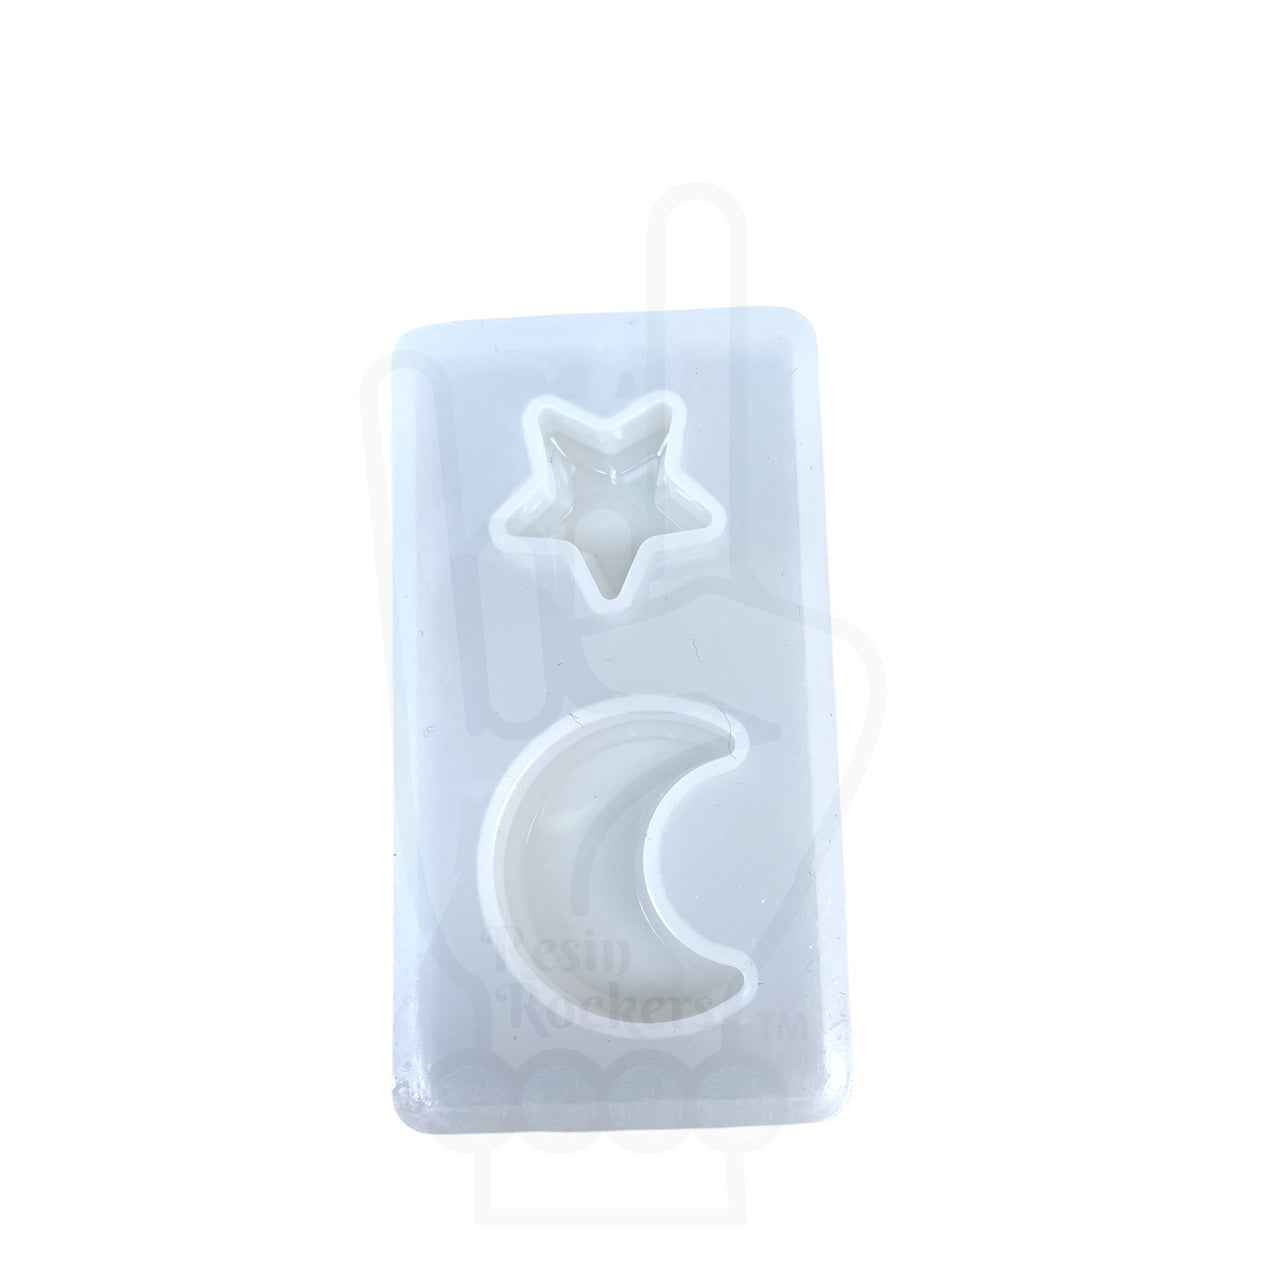 UV Safe Crescent Moon & Star Charm Duo Silicone Mold for UV or Epoxy Resin Art Single